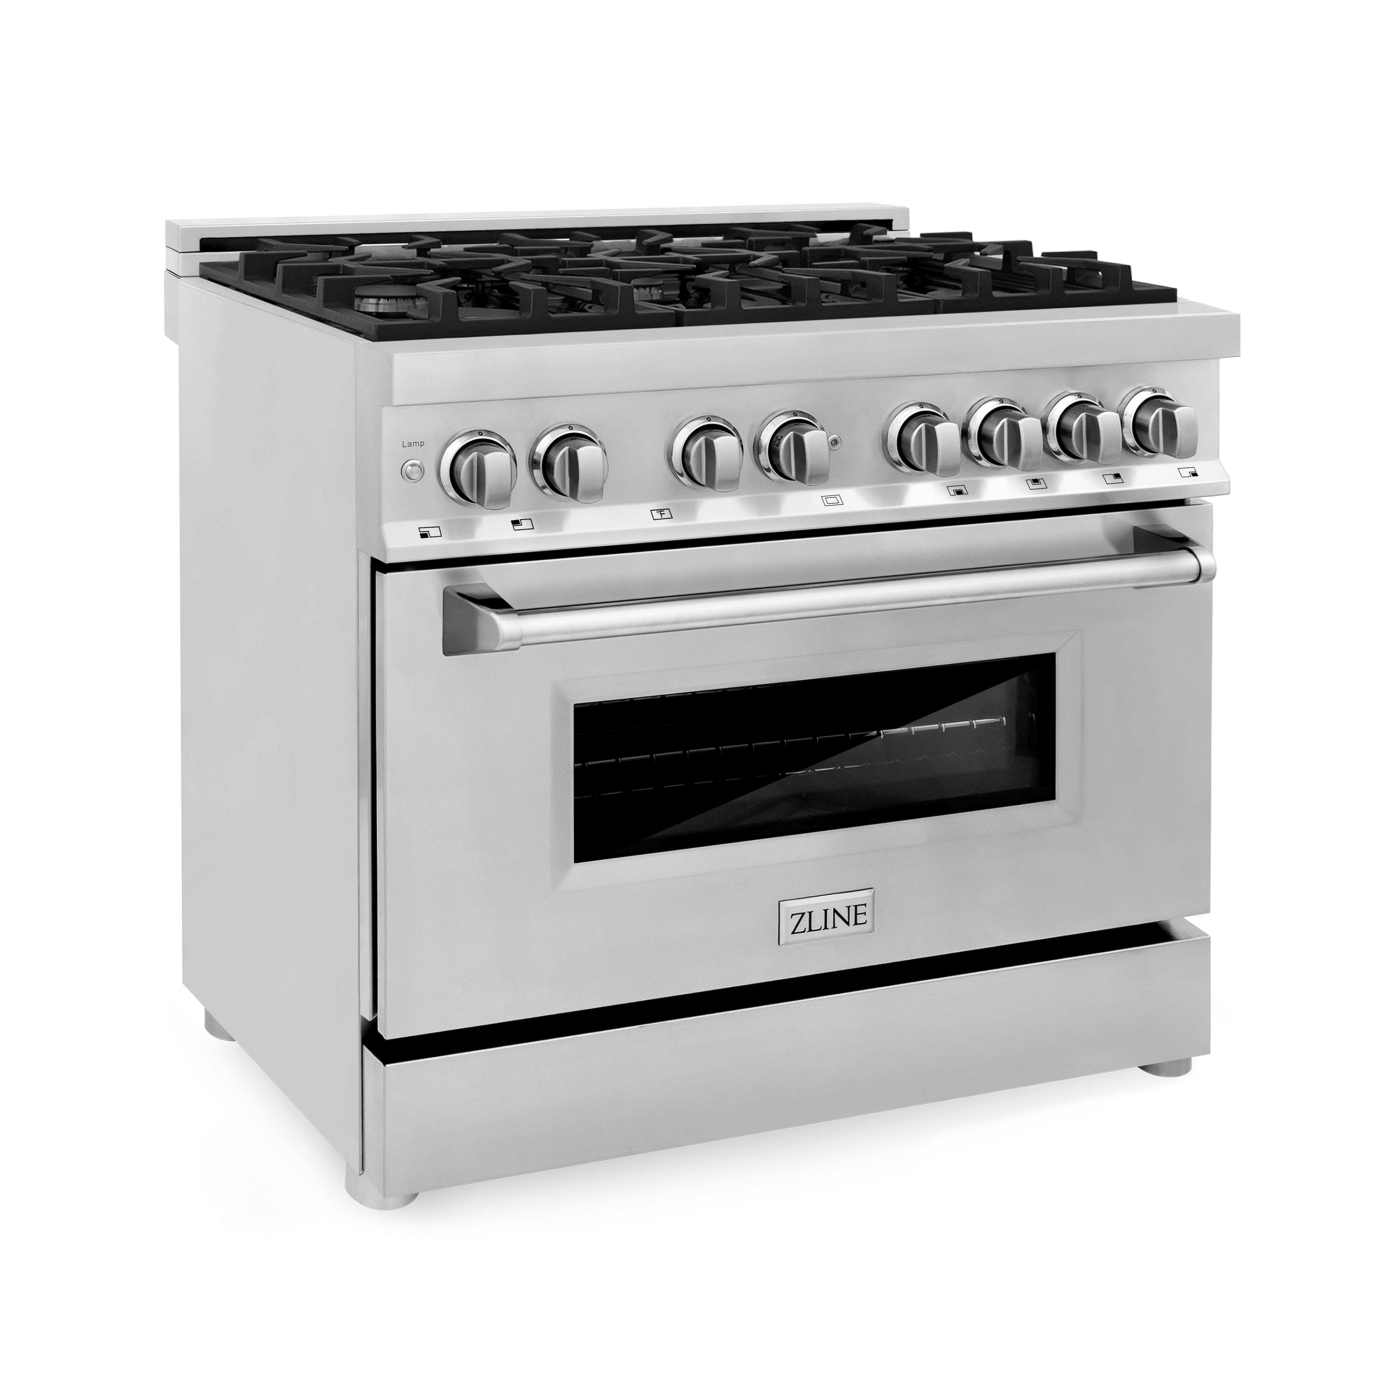 ZLINE 36 in. Dual Fuel Range with Gas Stove and Electric Oven in Stainless Steel (RA36) - white background